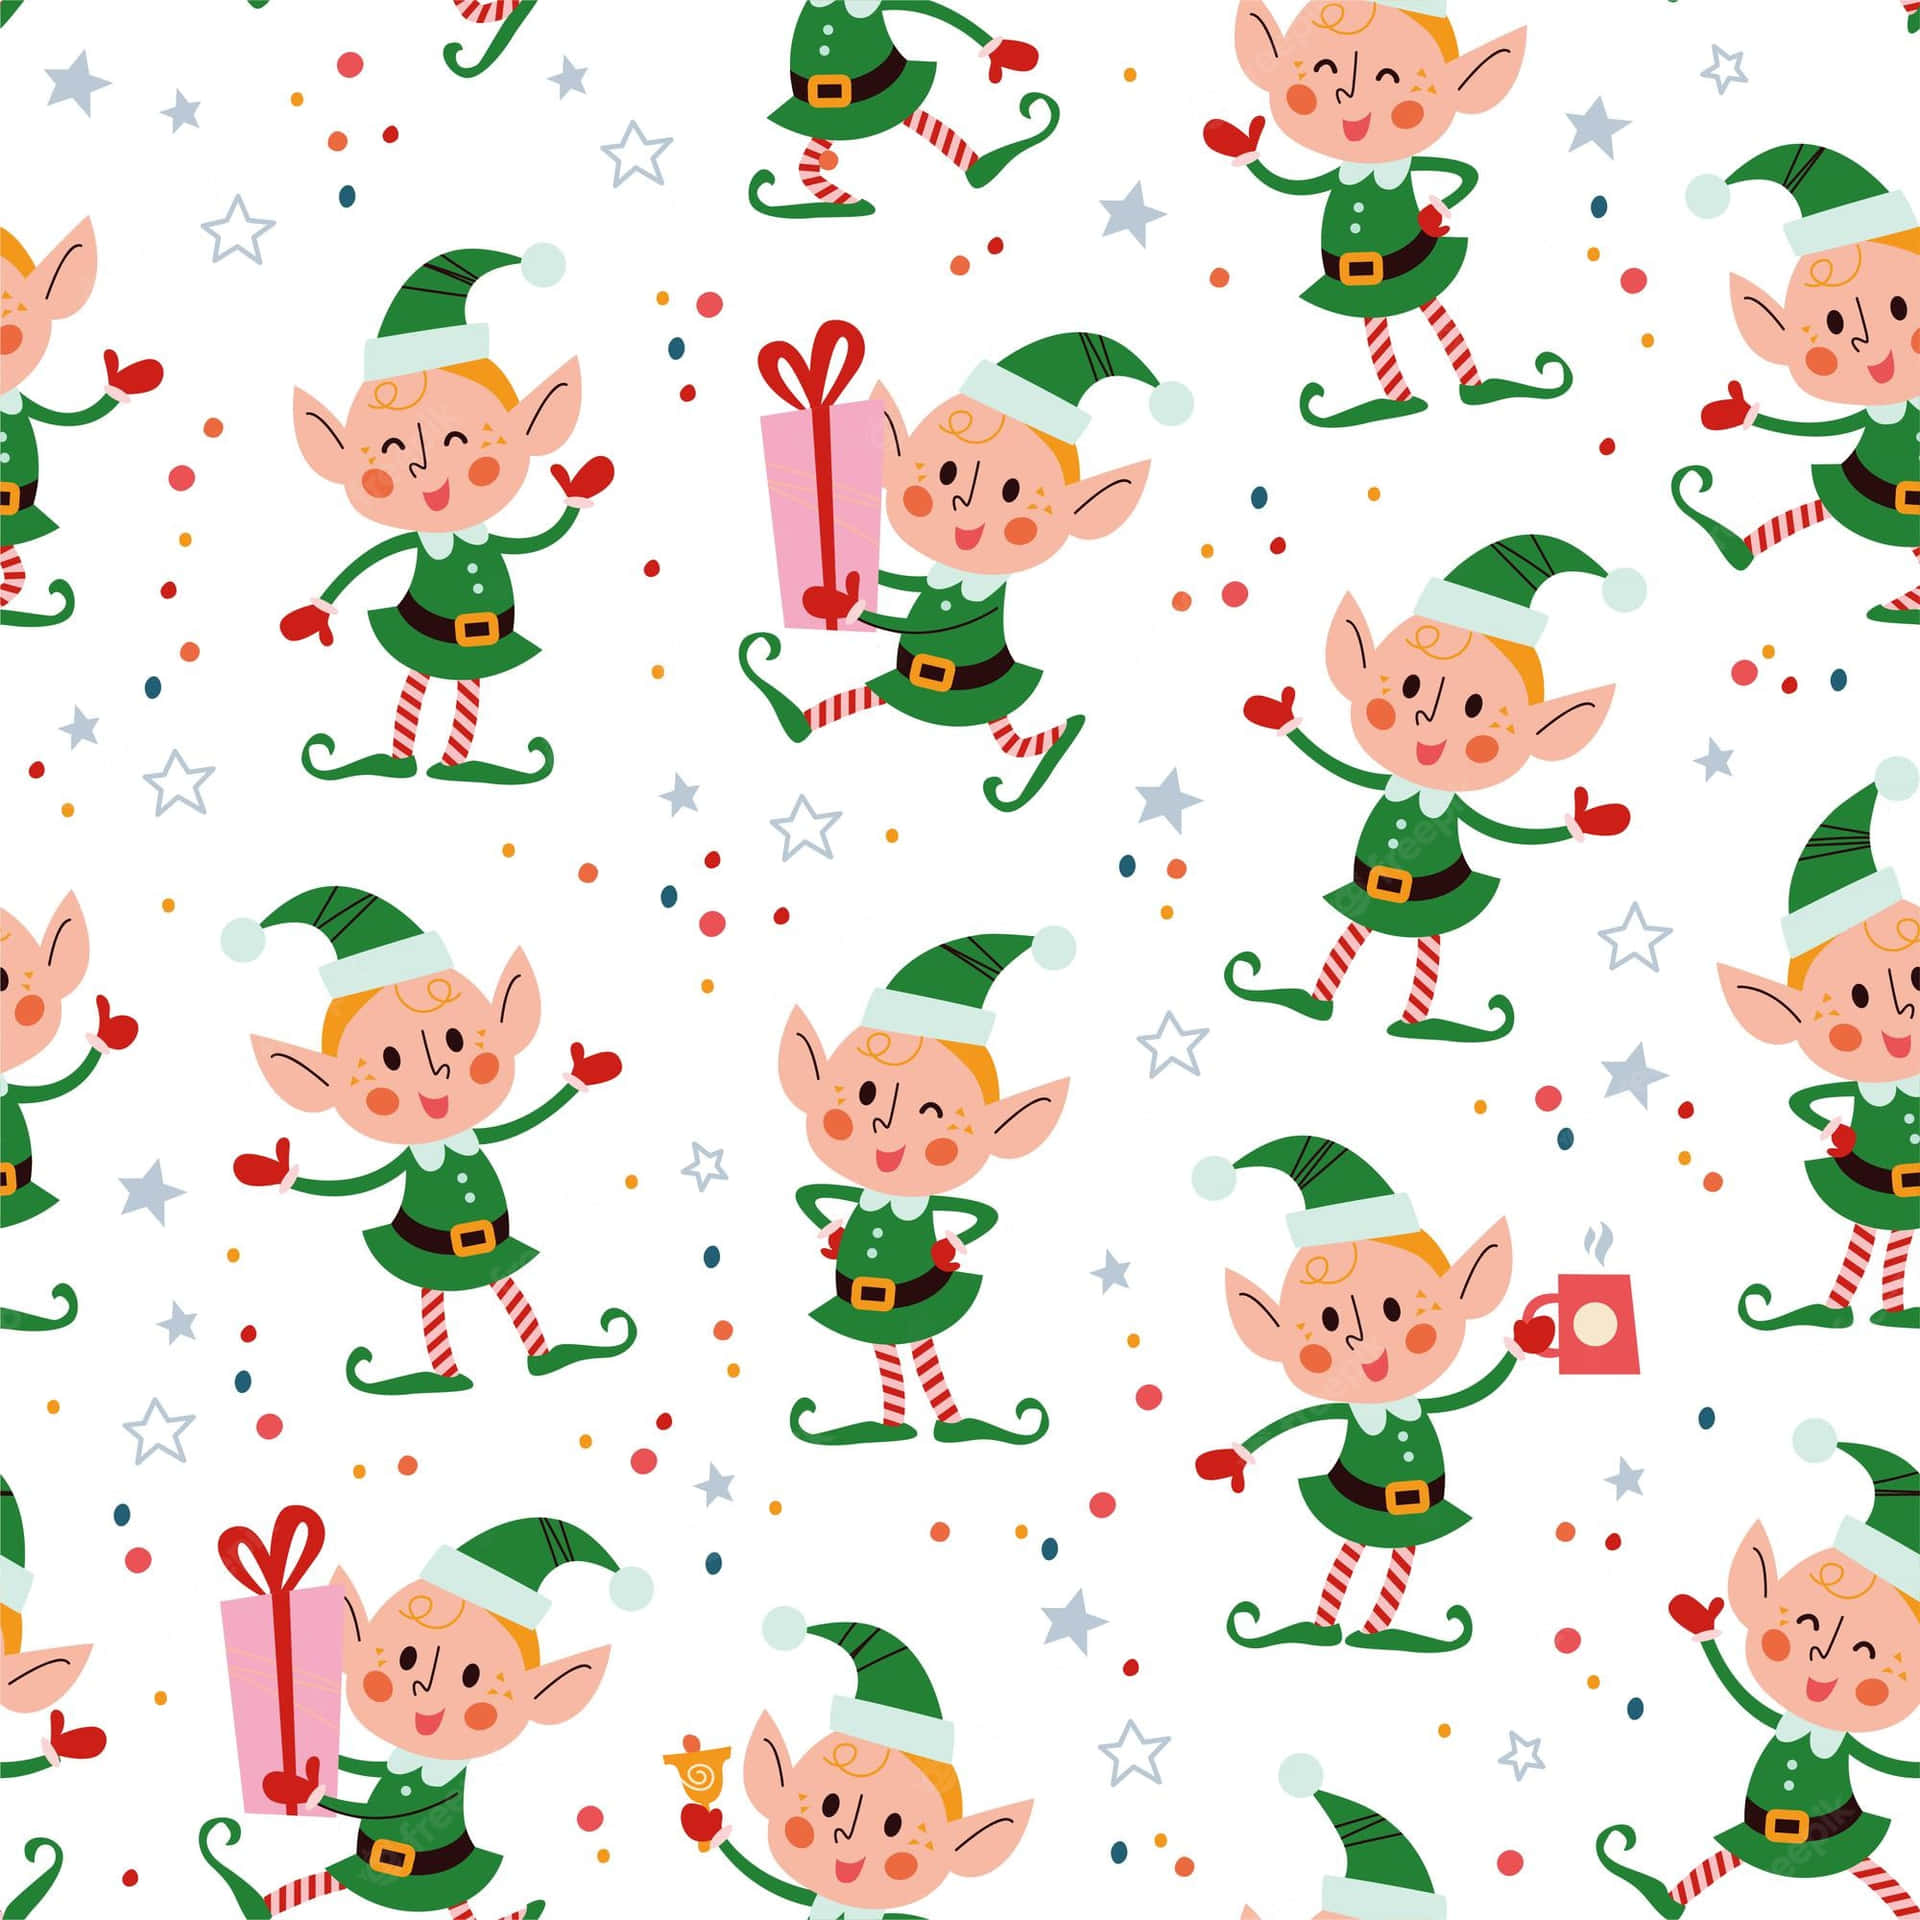 "Cheerful Christmas Elves Ready to Spread Holiday Cheer!" Wallpaper